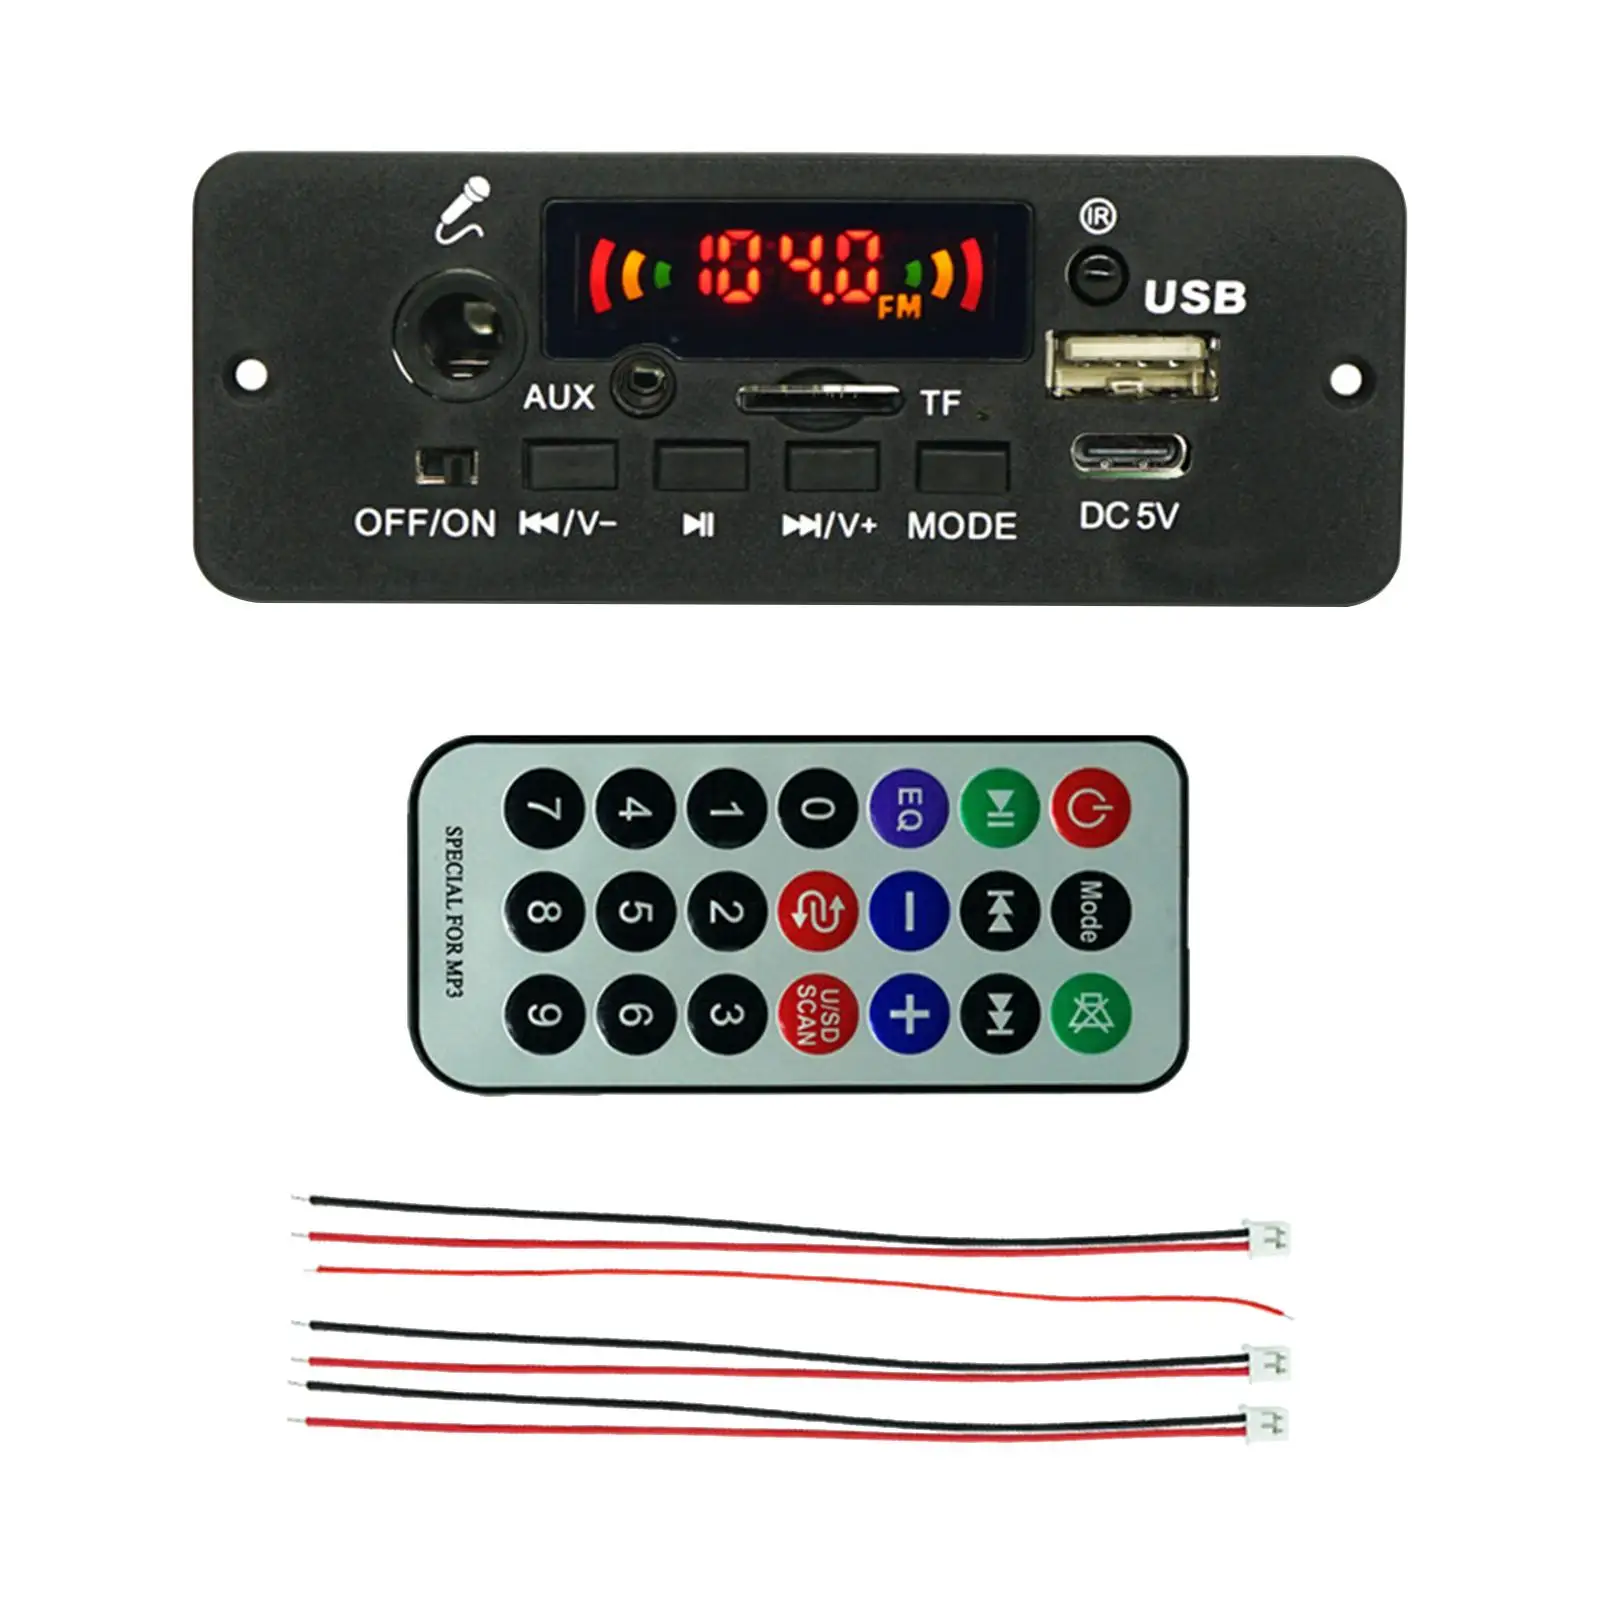 MP3 Decoder Board Support TF USB Audio Module Support Recording Microphone 2x5W Amplifier Car Radio Module MP3 Decoding Board